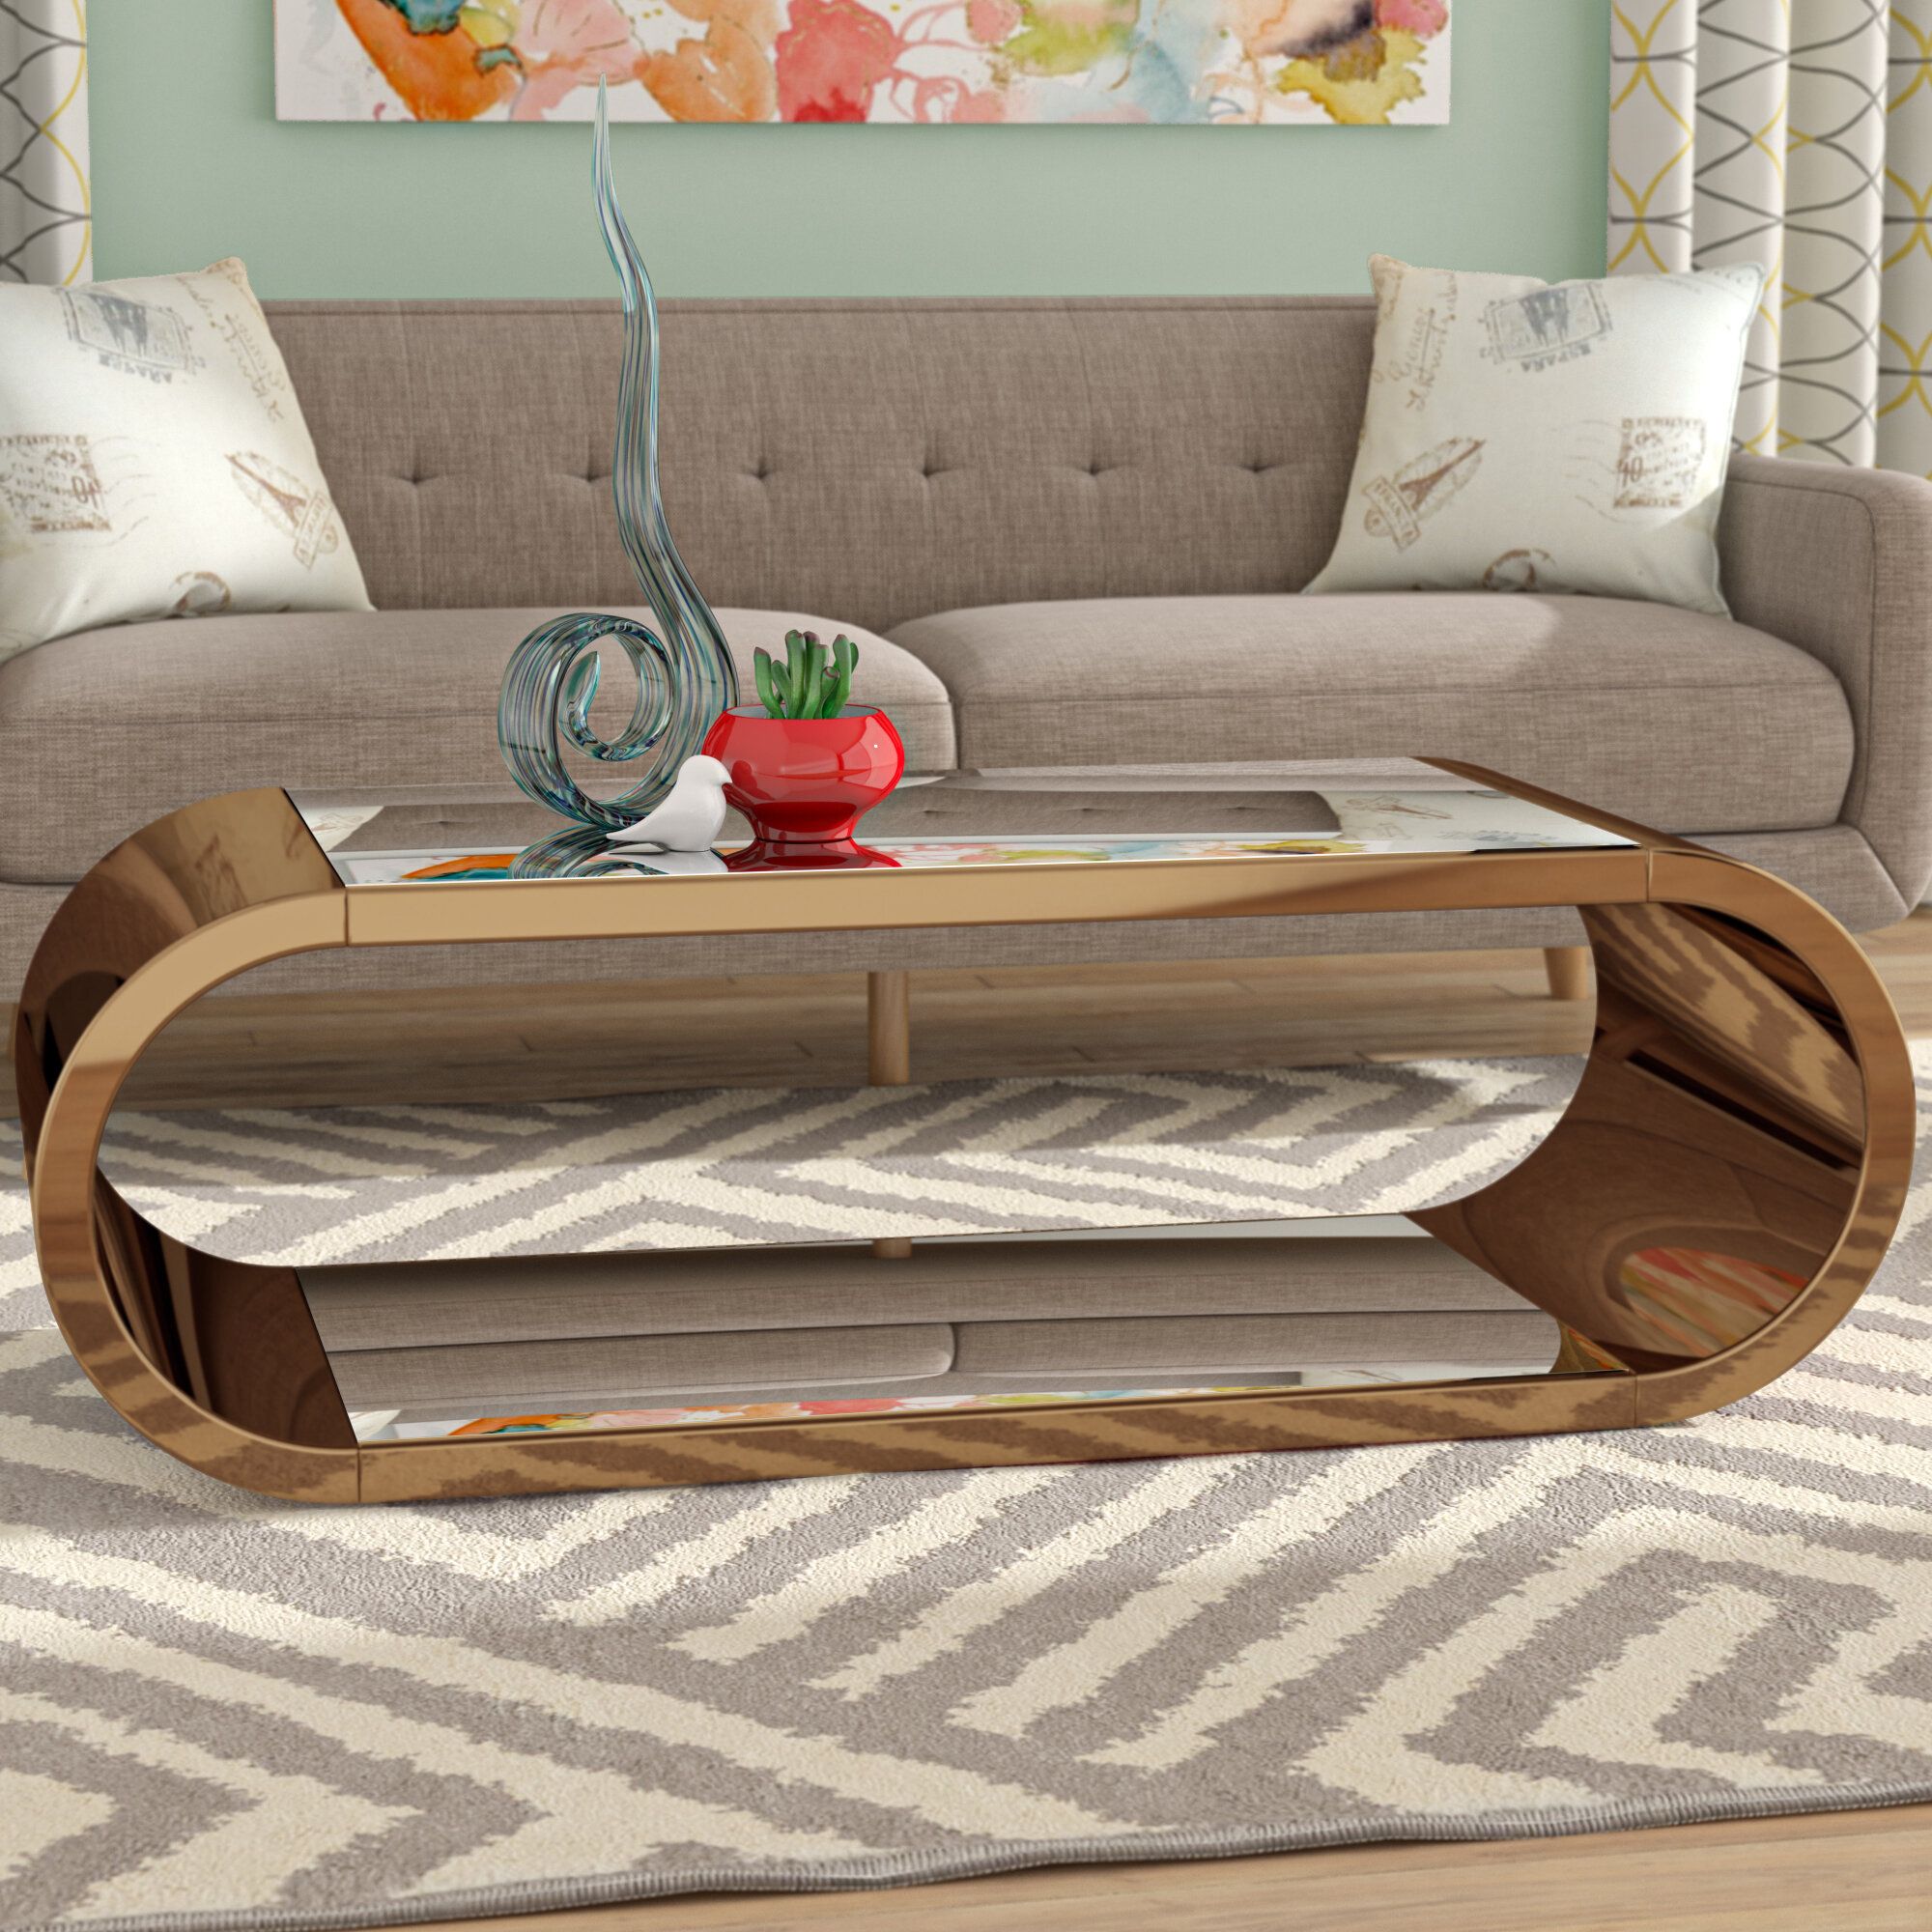 Orren Ellis Jasonville Floor Shelf Coffee Table With Storage & Reviews |  Wayfair With Rose Gold Coffee Tables (View 16 of 20)